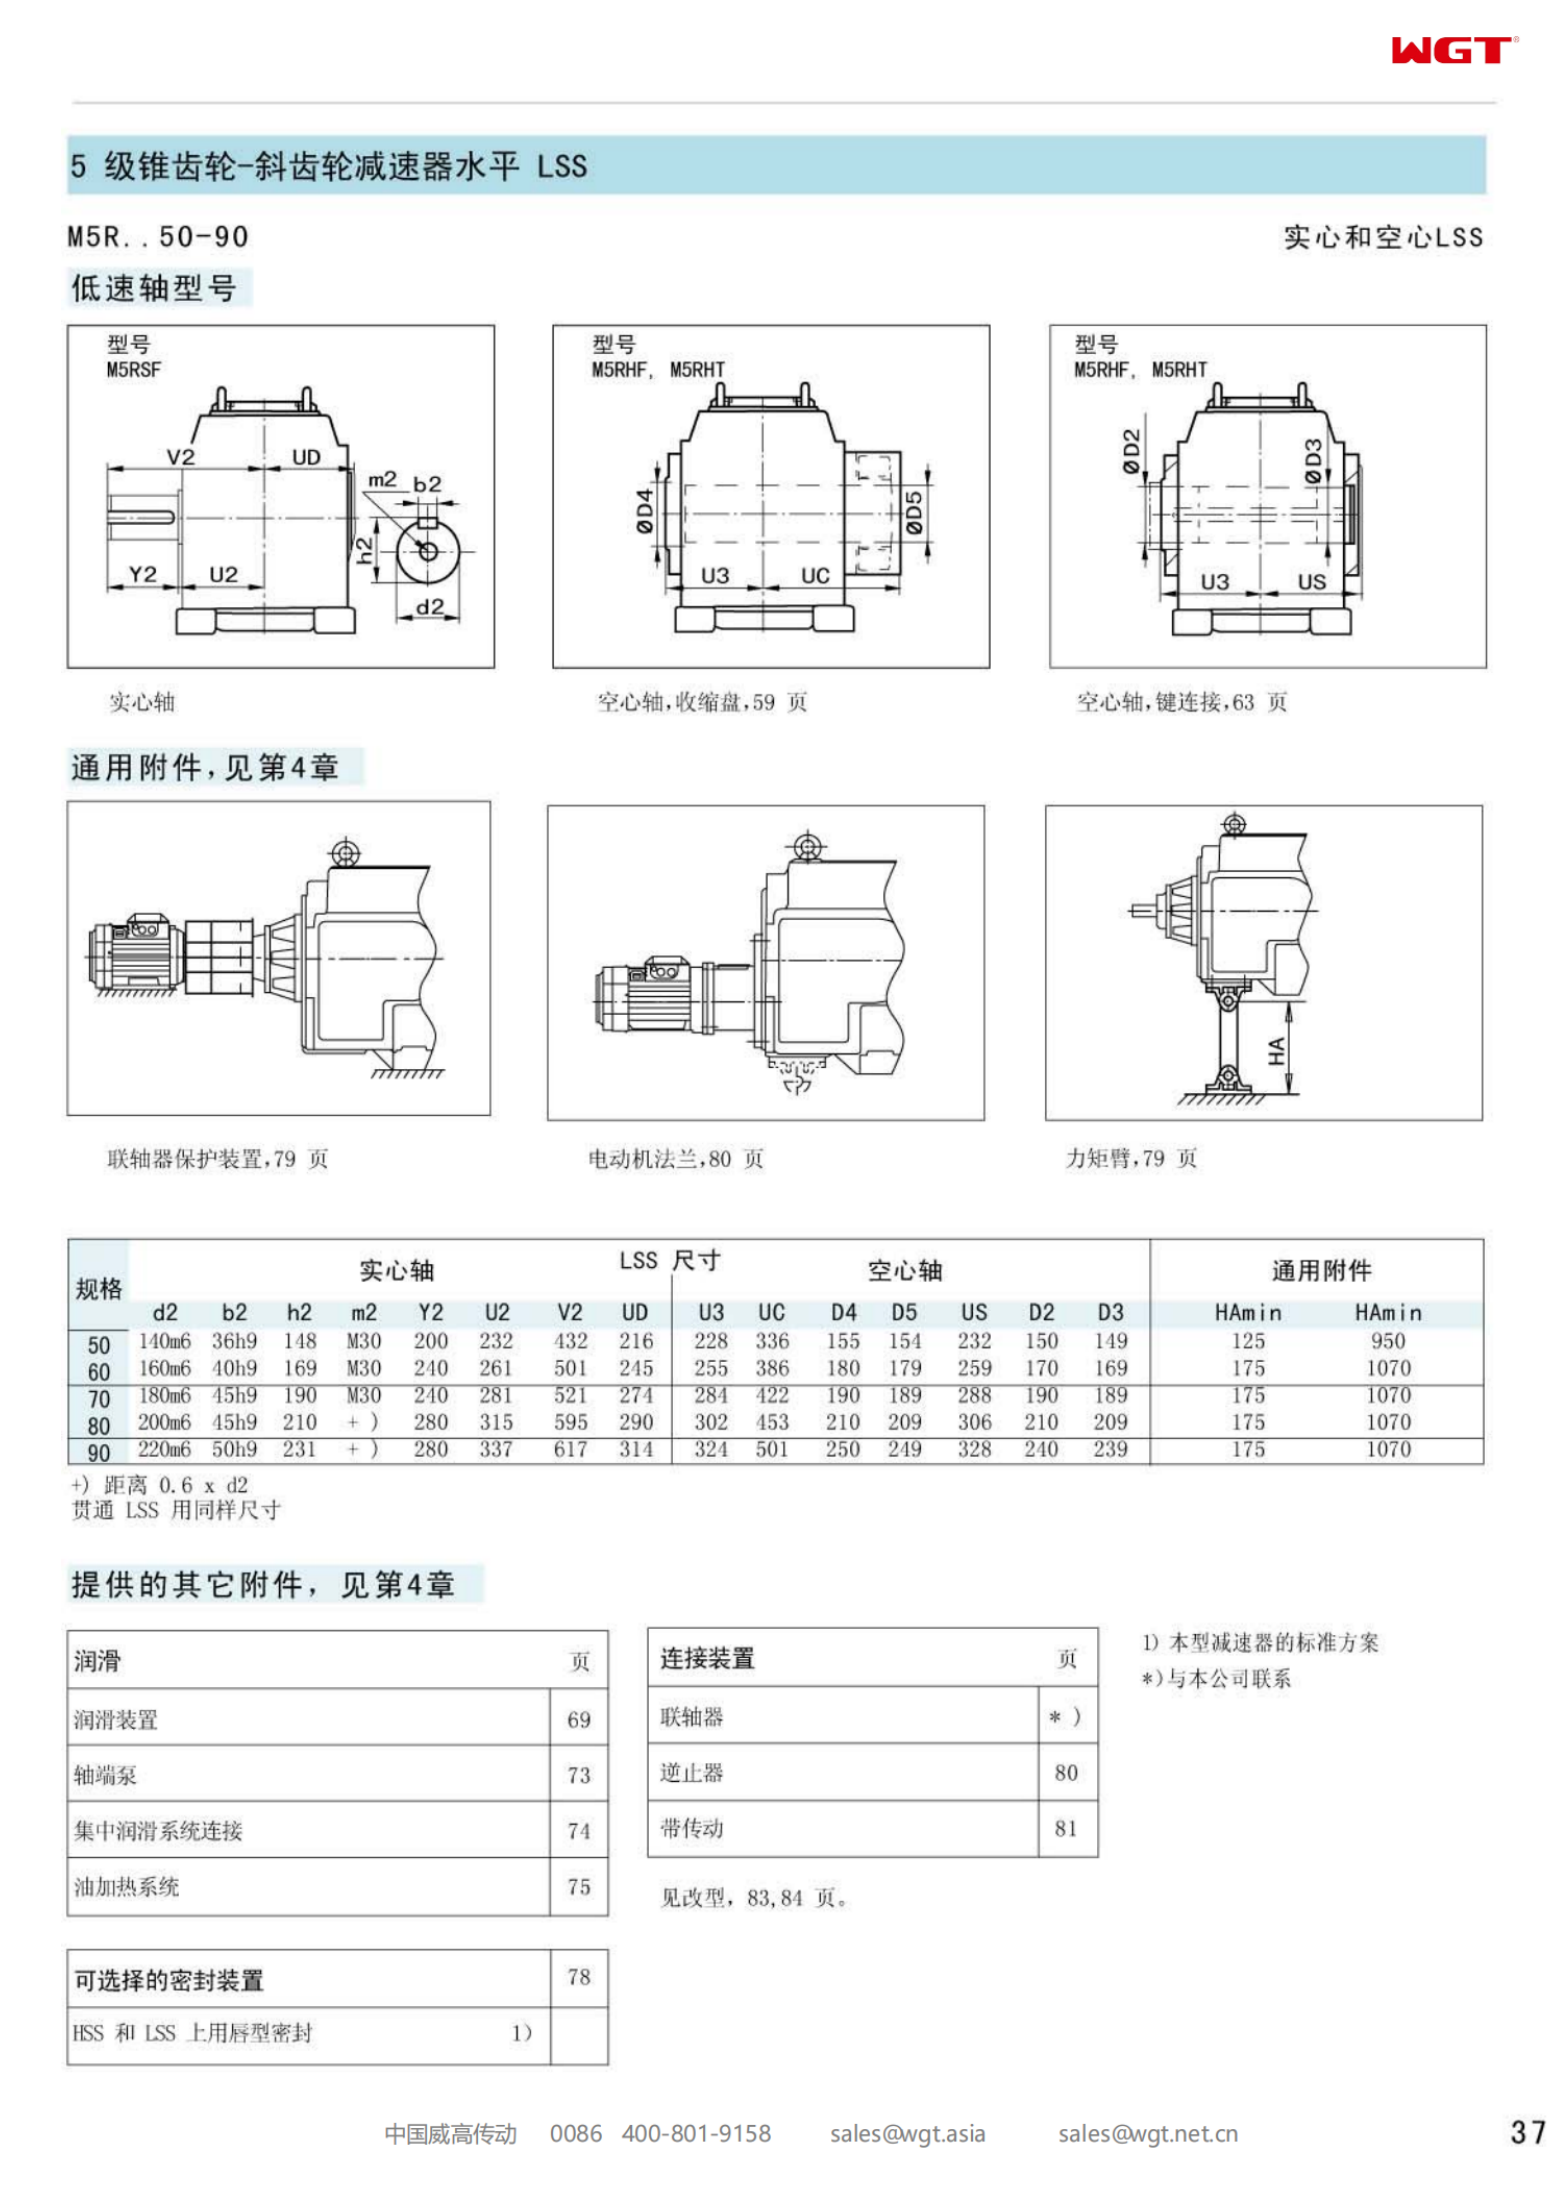 M2PVHF20 Replace_SEW_M_Series Gearbox